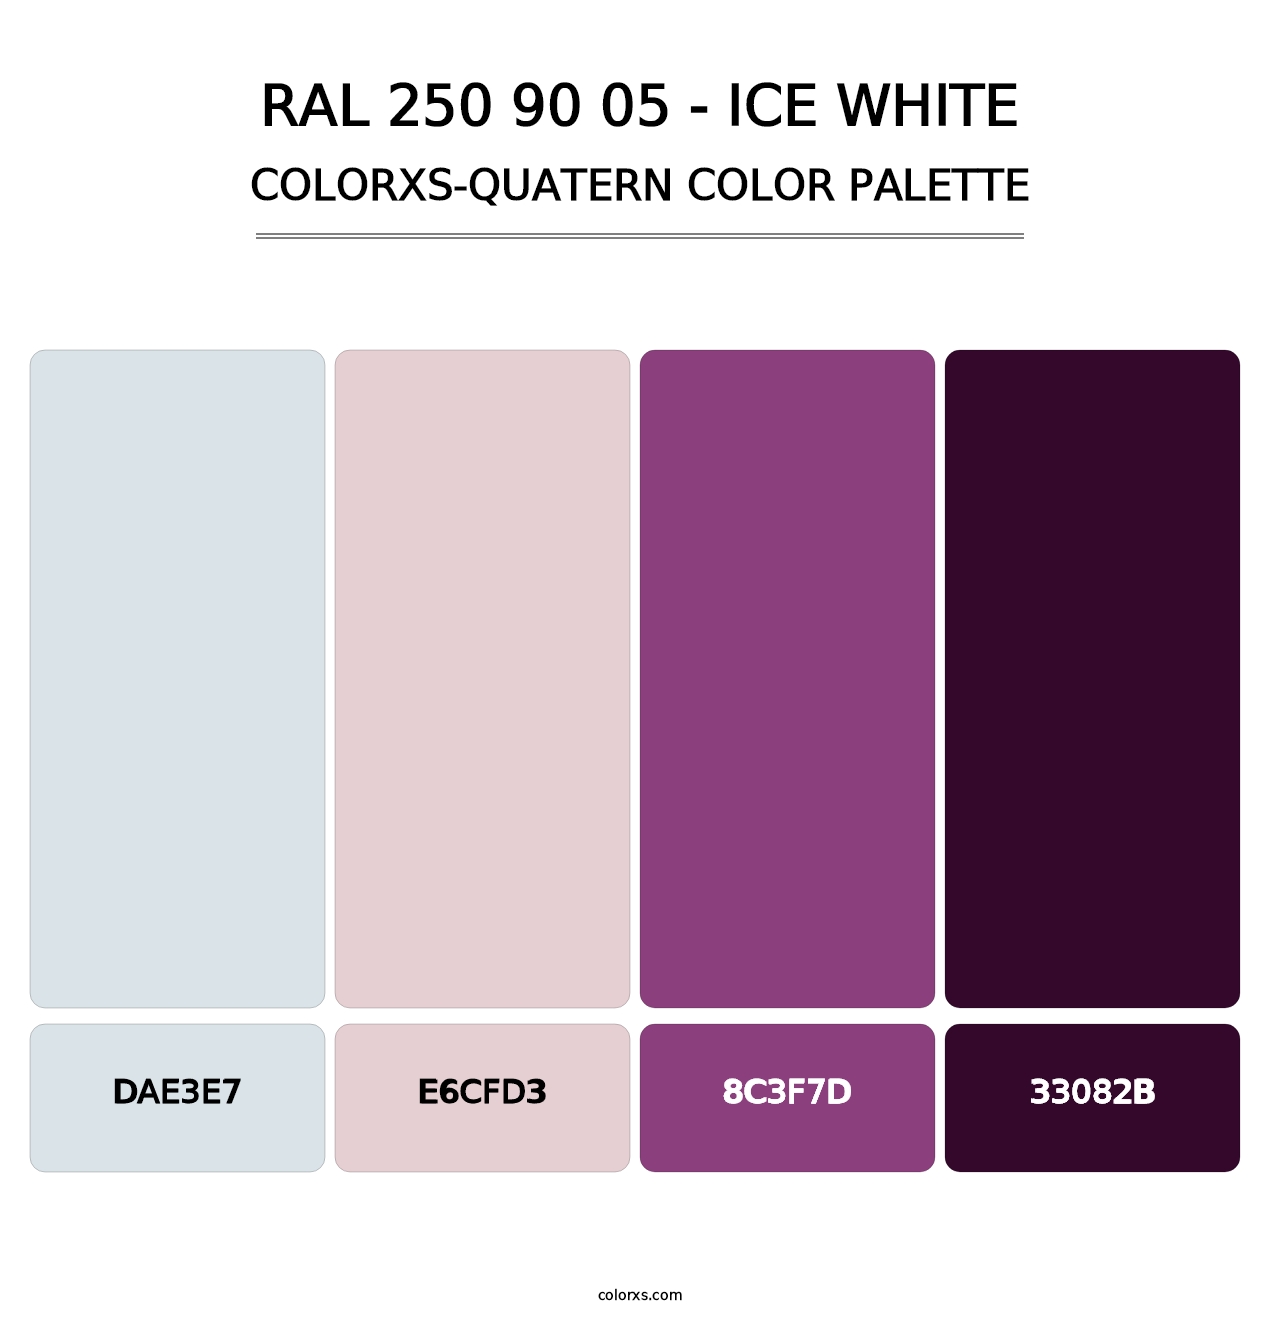 RAL 250 90 05 - Ice White - Colorxs Quatern Palette